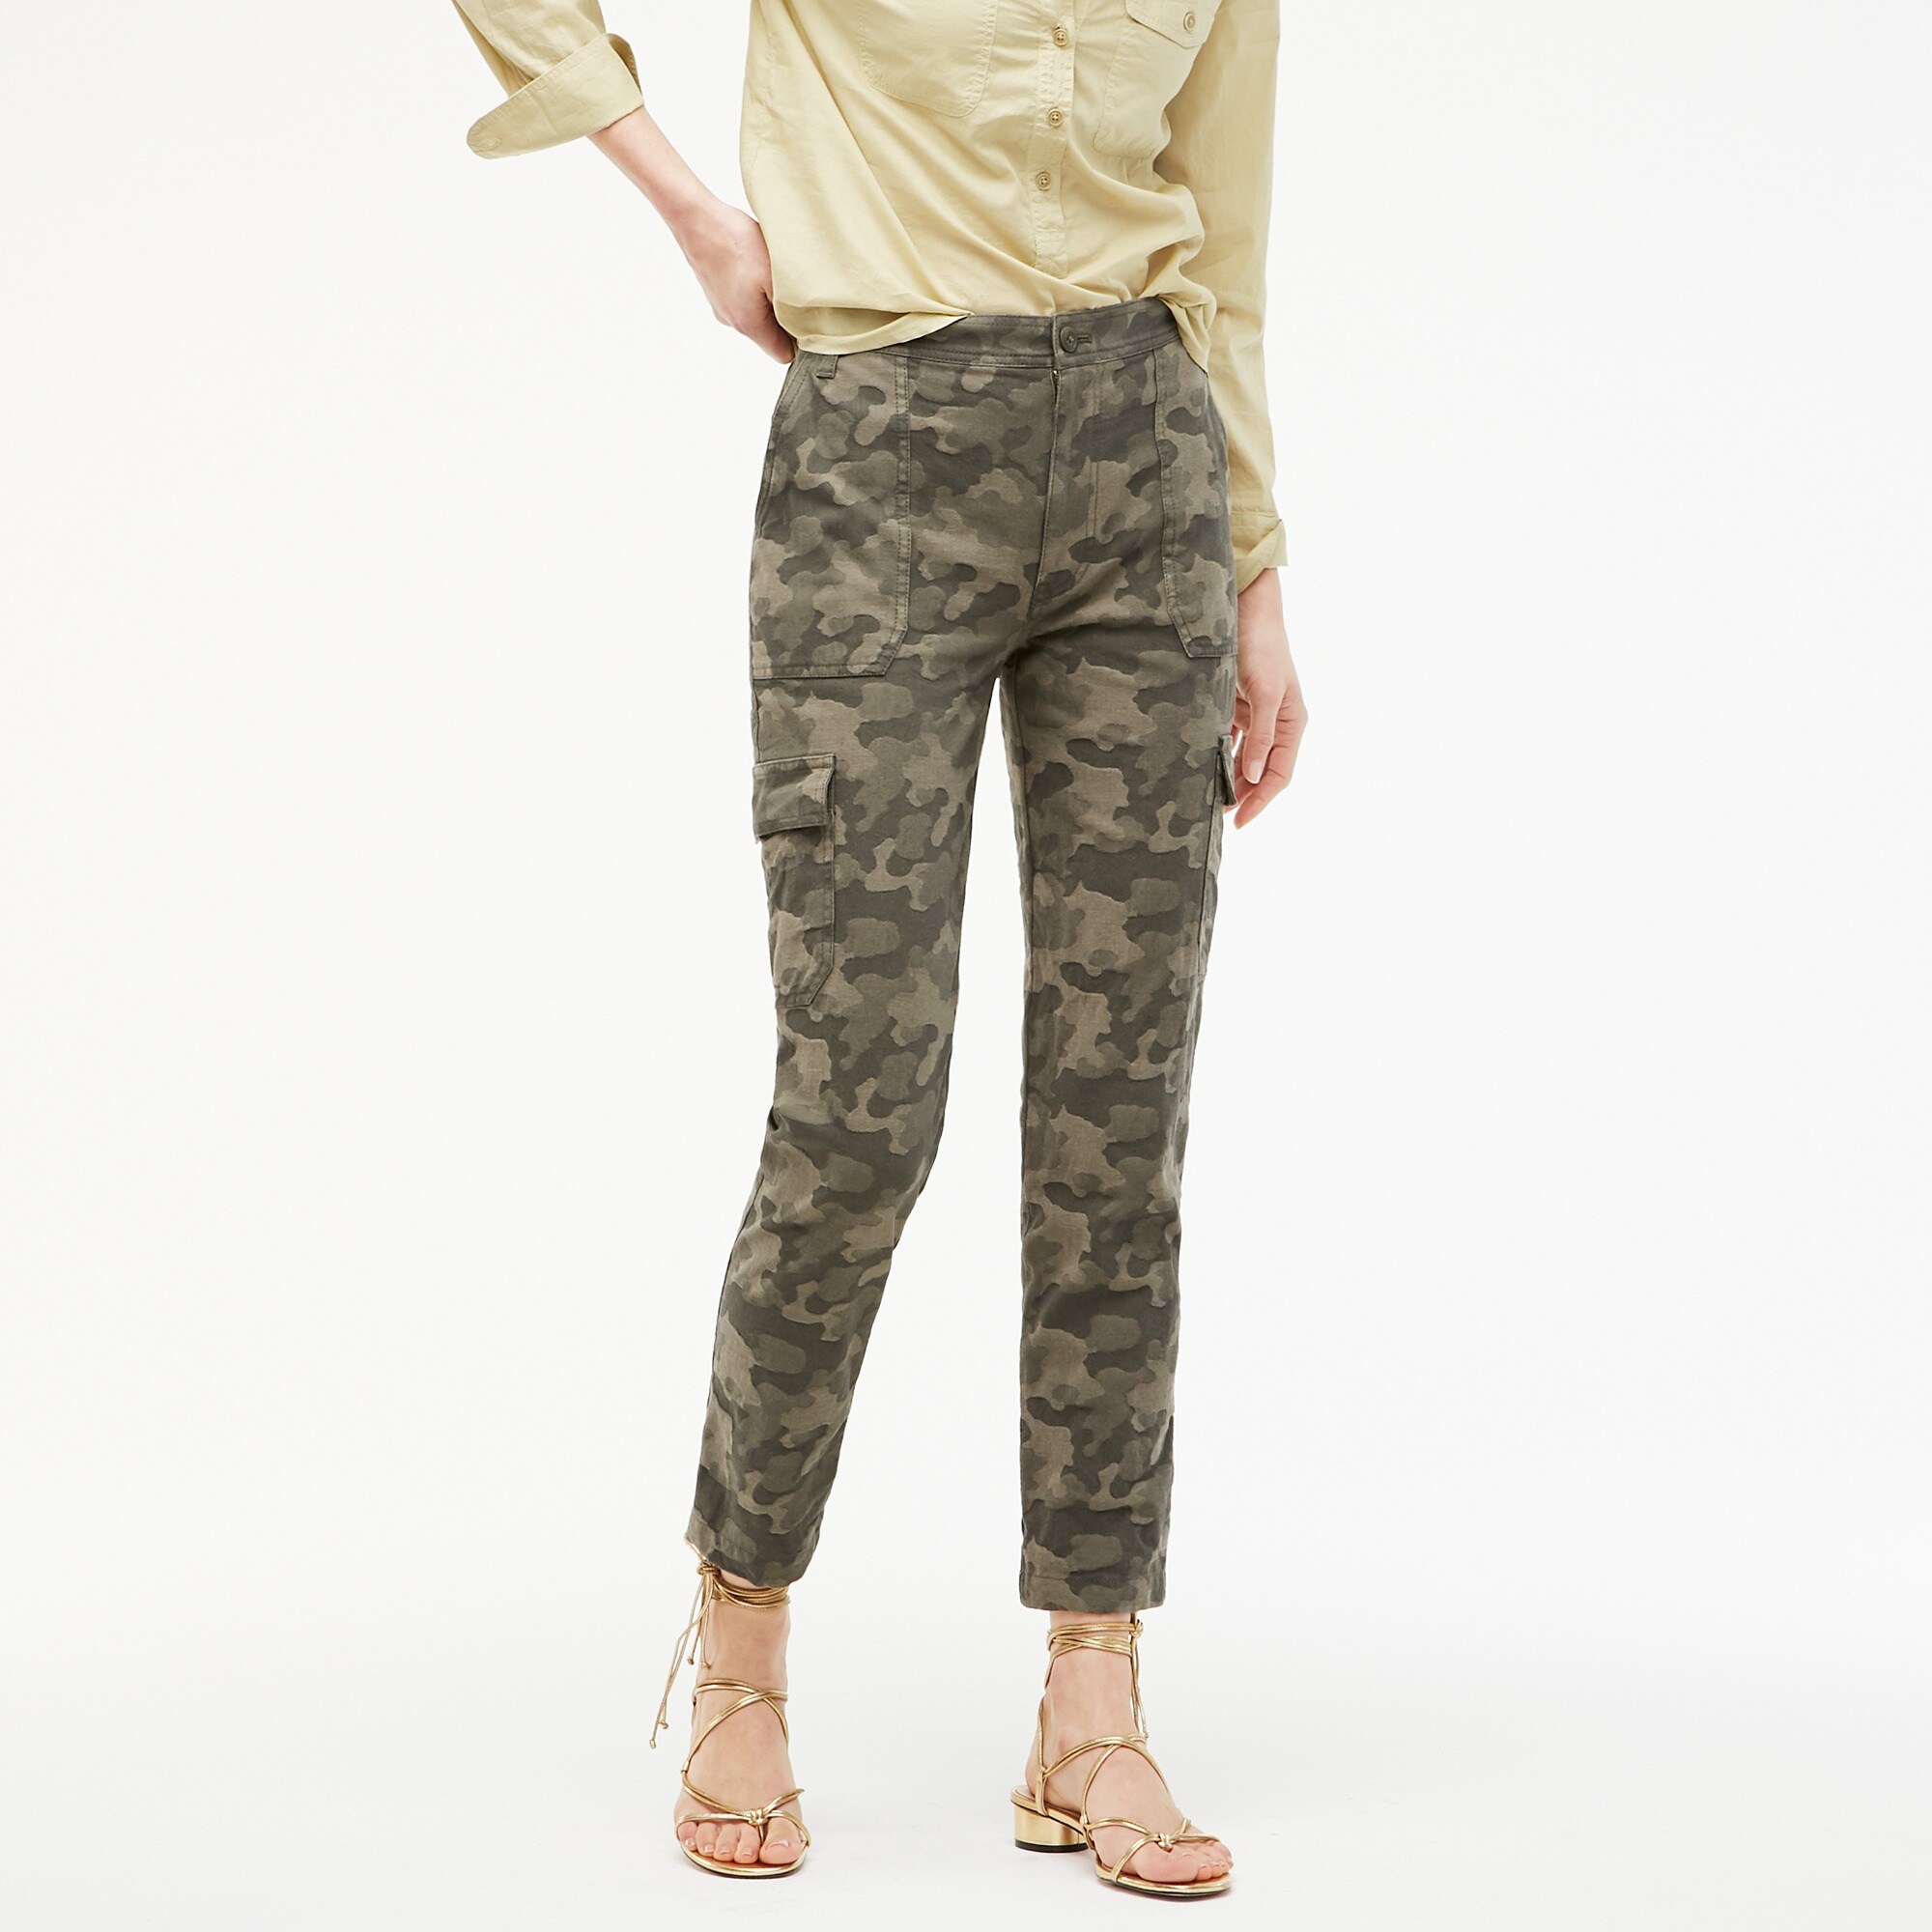 women's tall camouflage pants